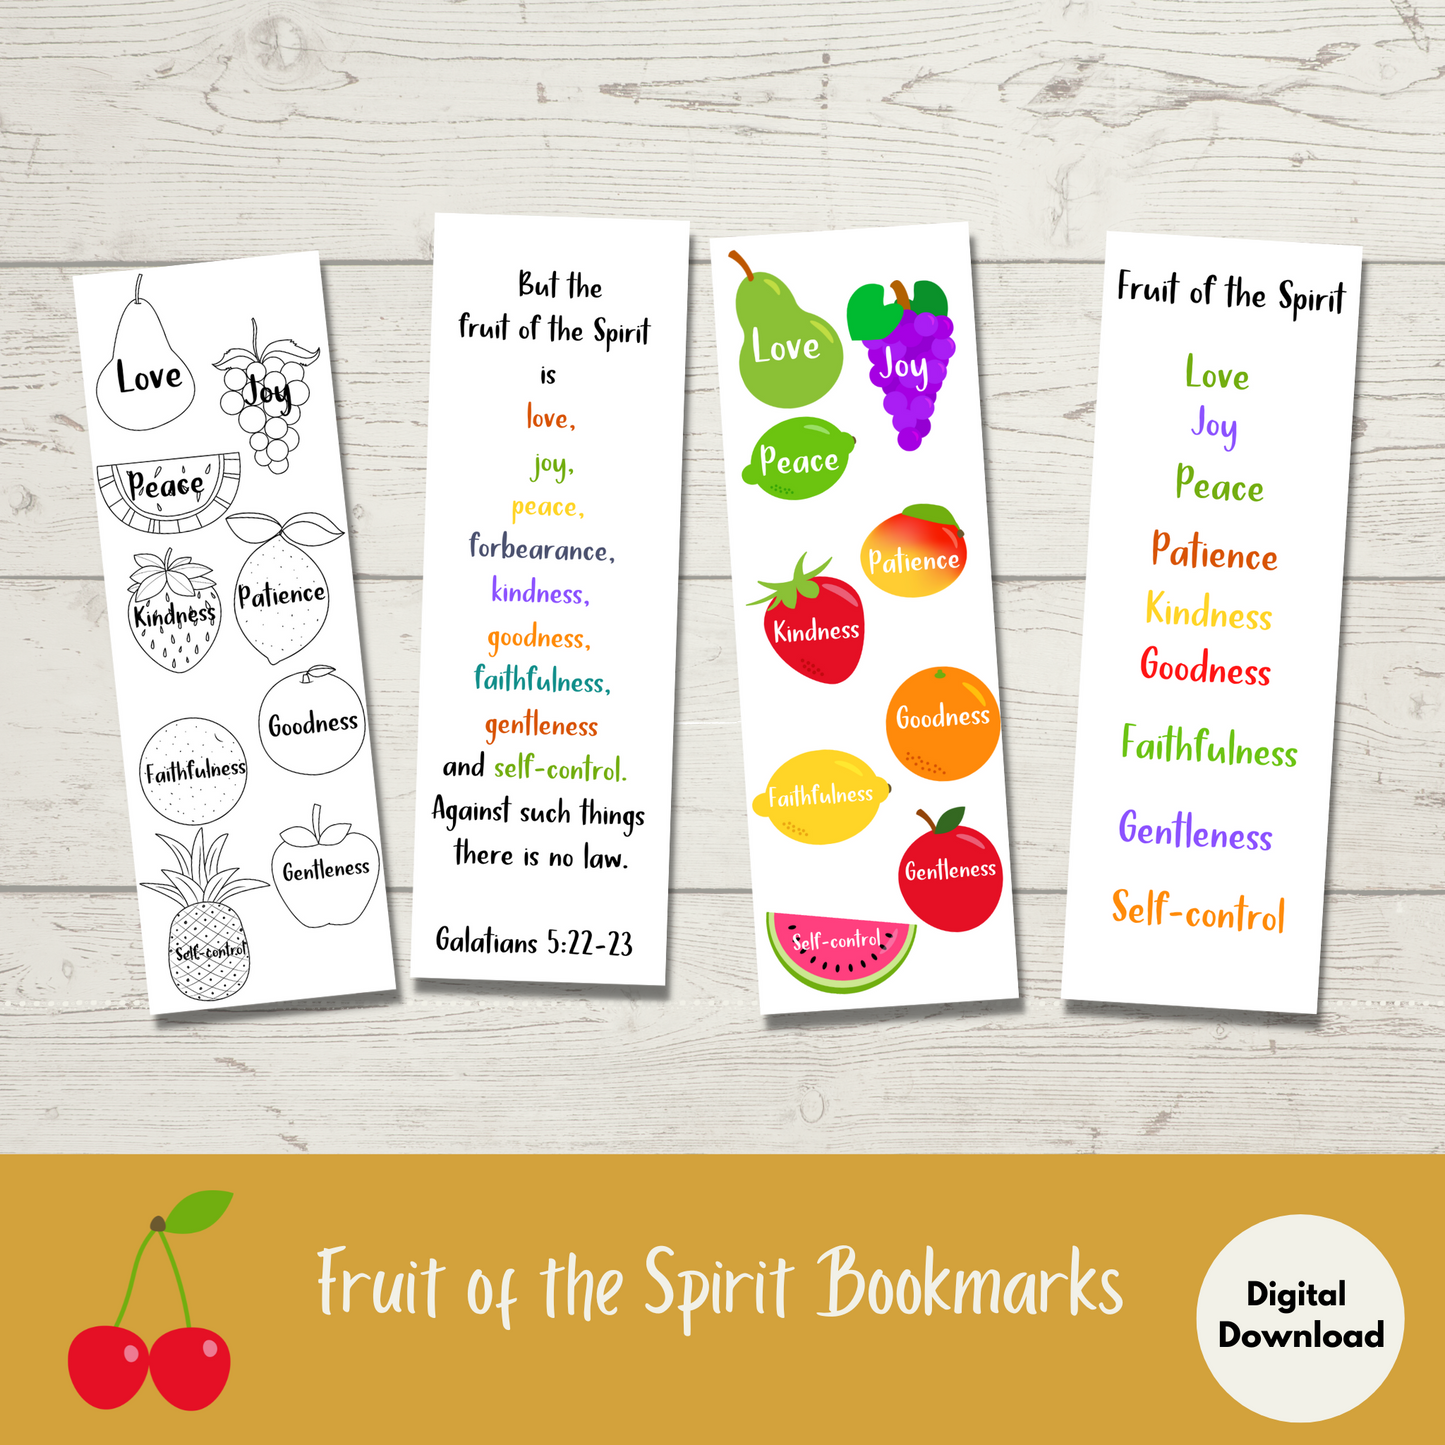 Fruit of the Spirit Bookmarks